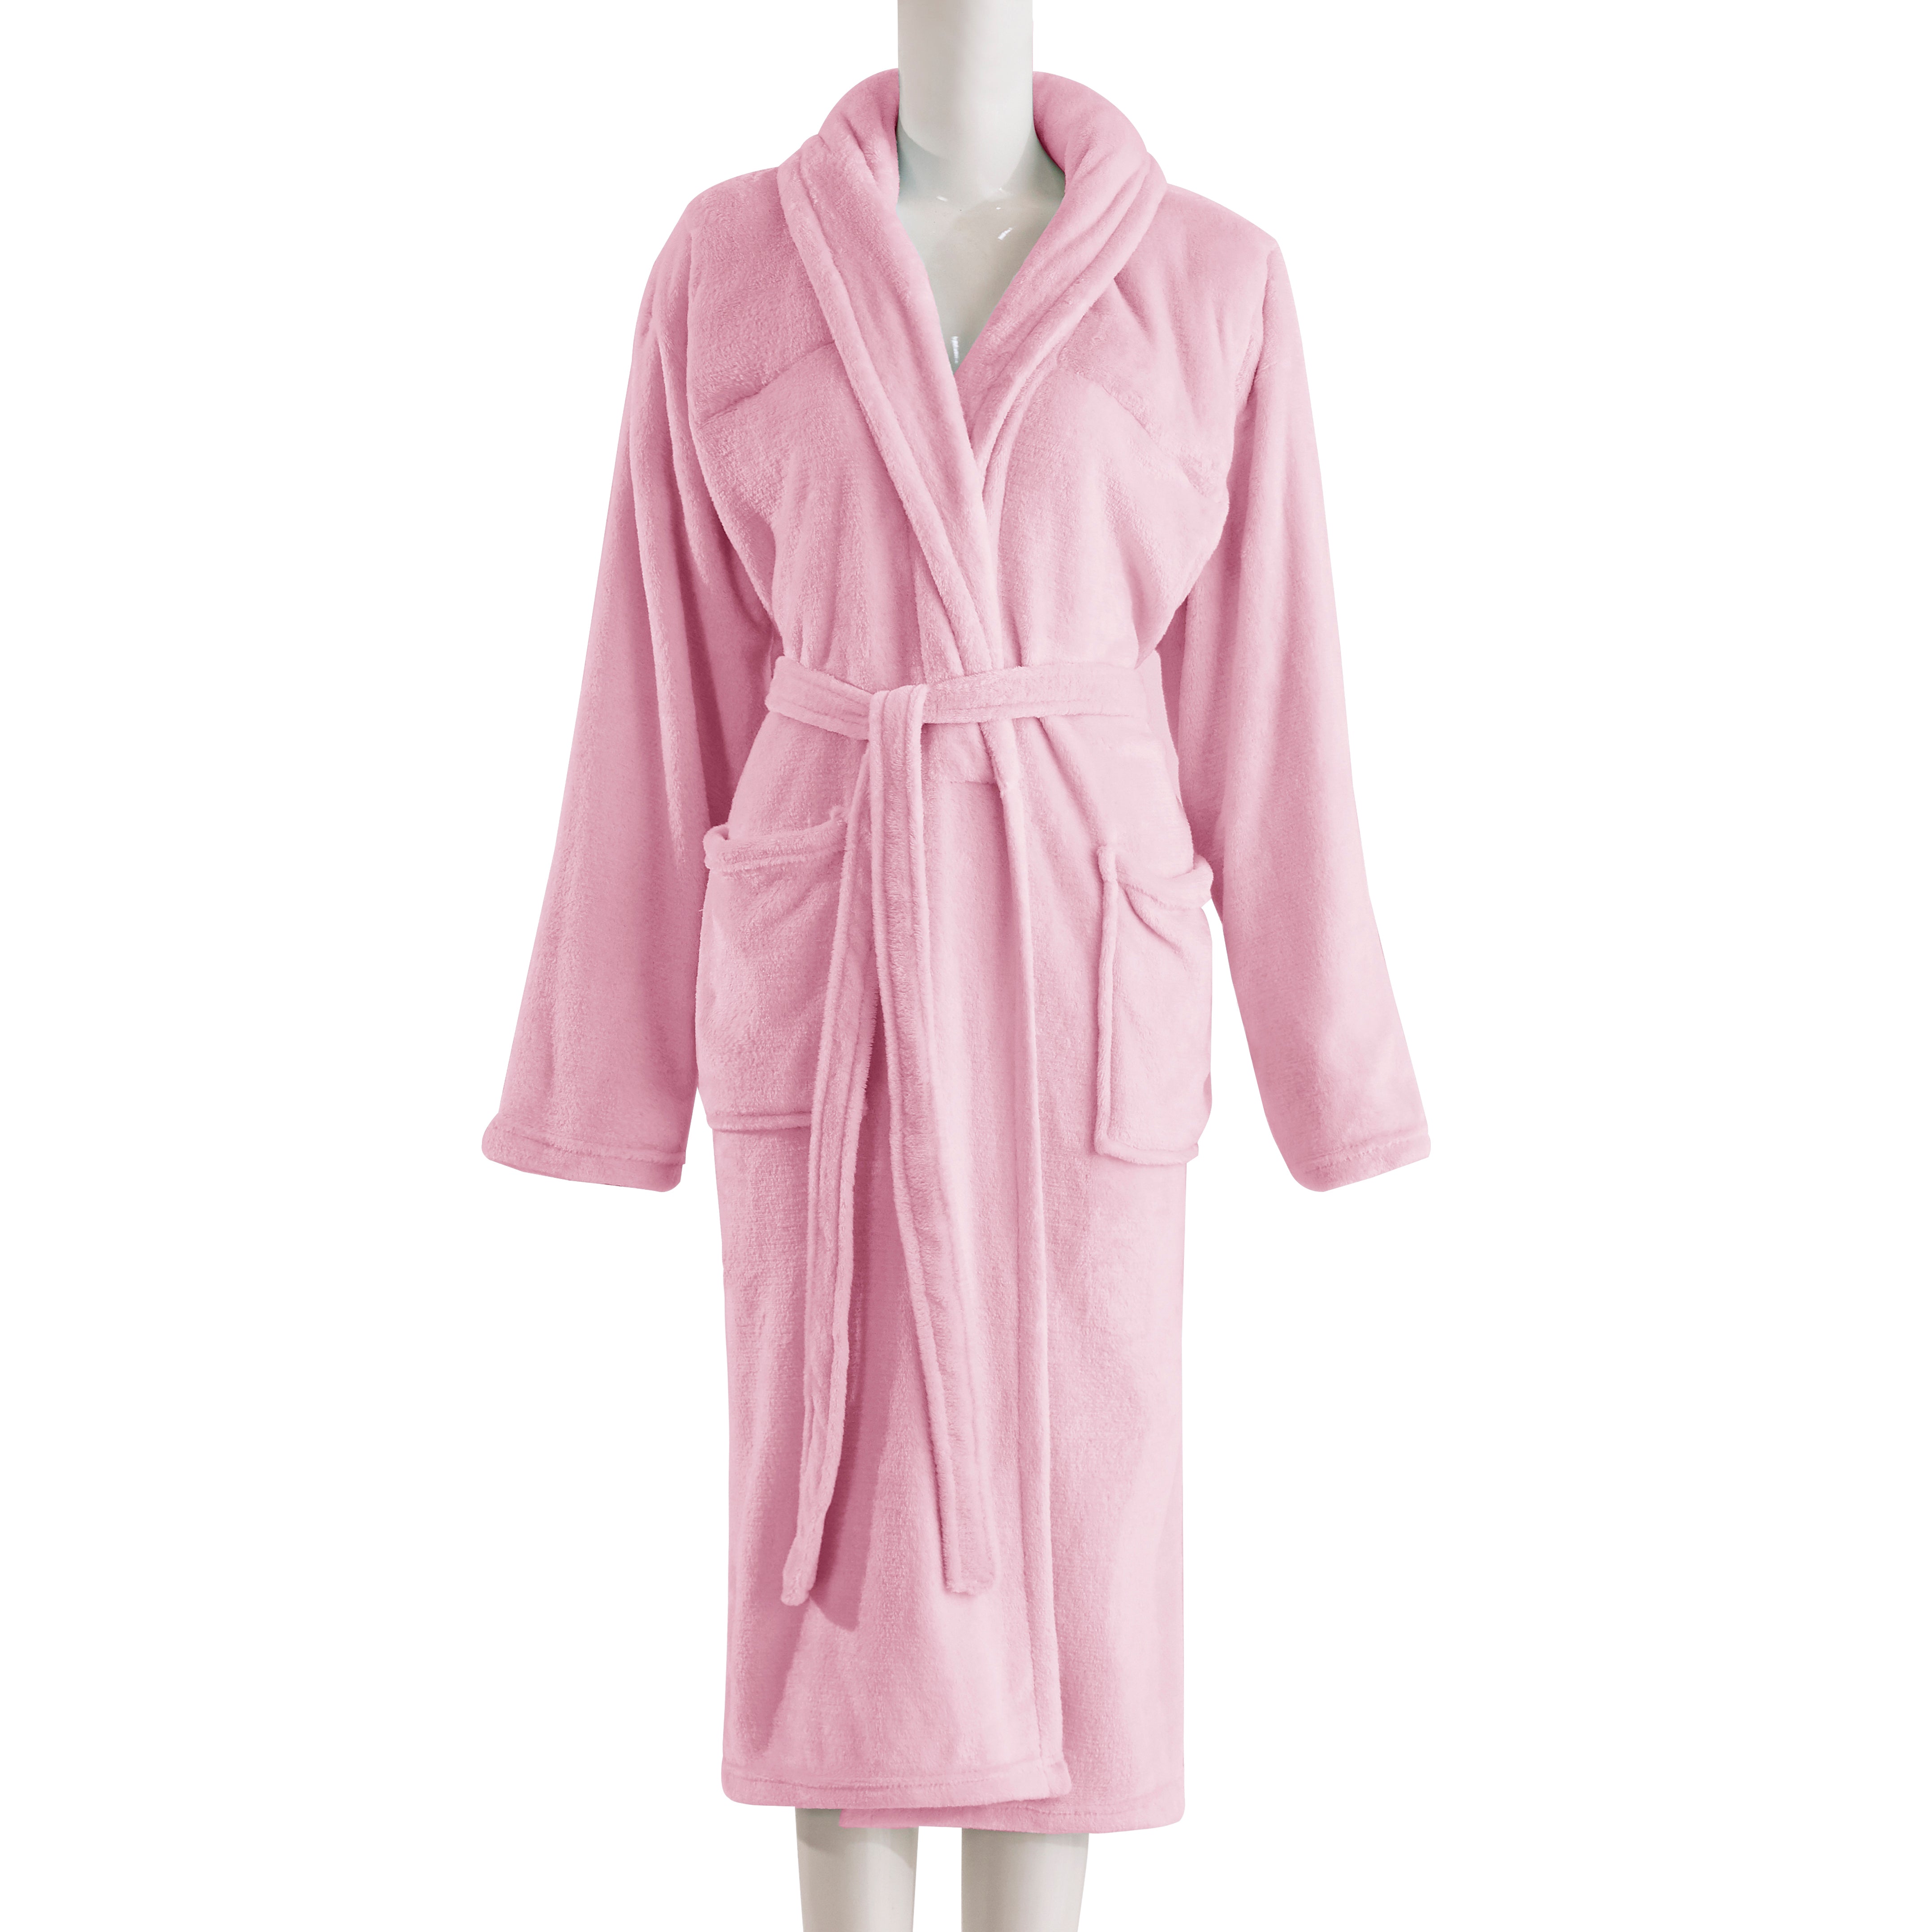 Weighted Robe Machine Washable 5 lb